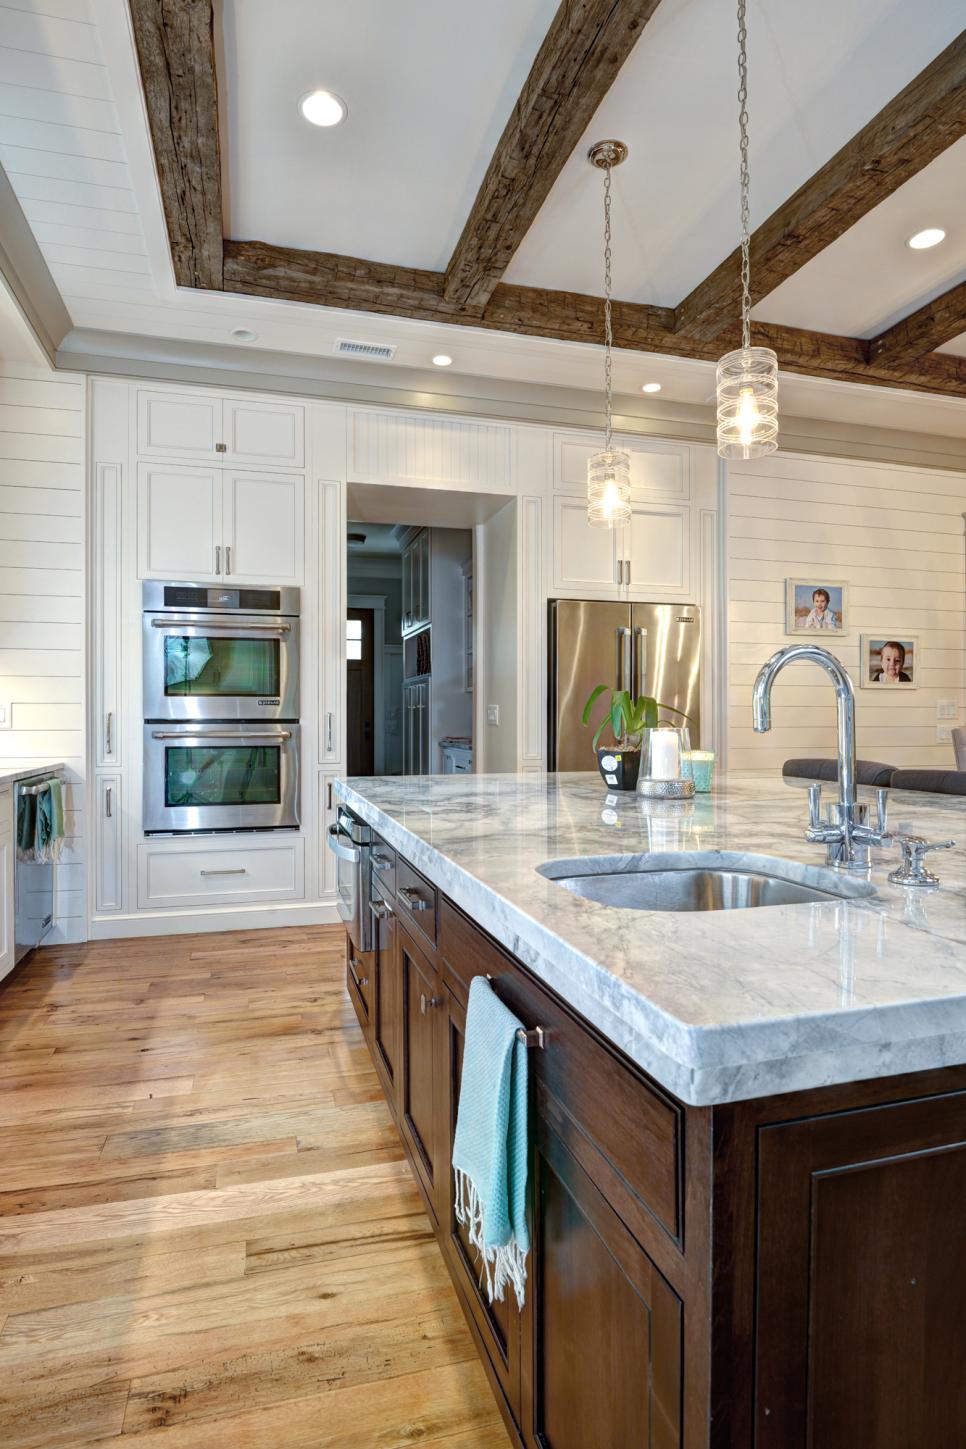 Contemporary Kitchen with Reclaimed Wood Beams and Floors